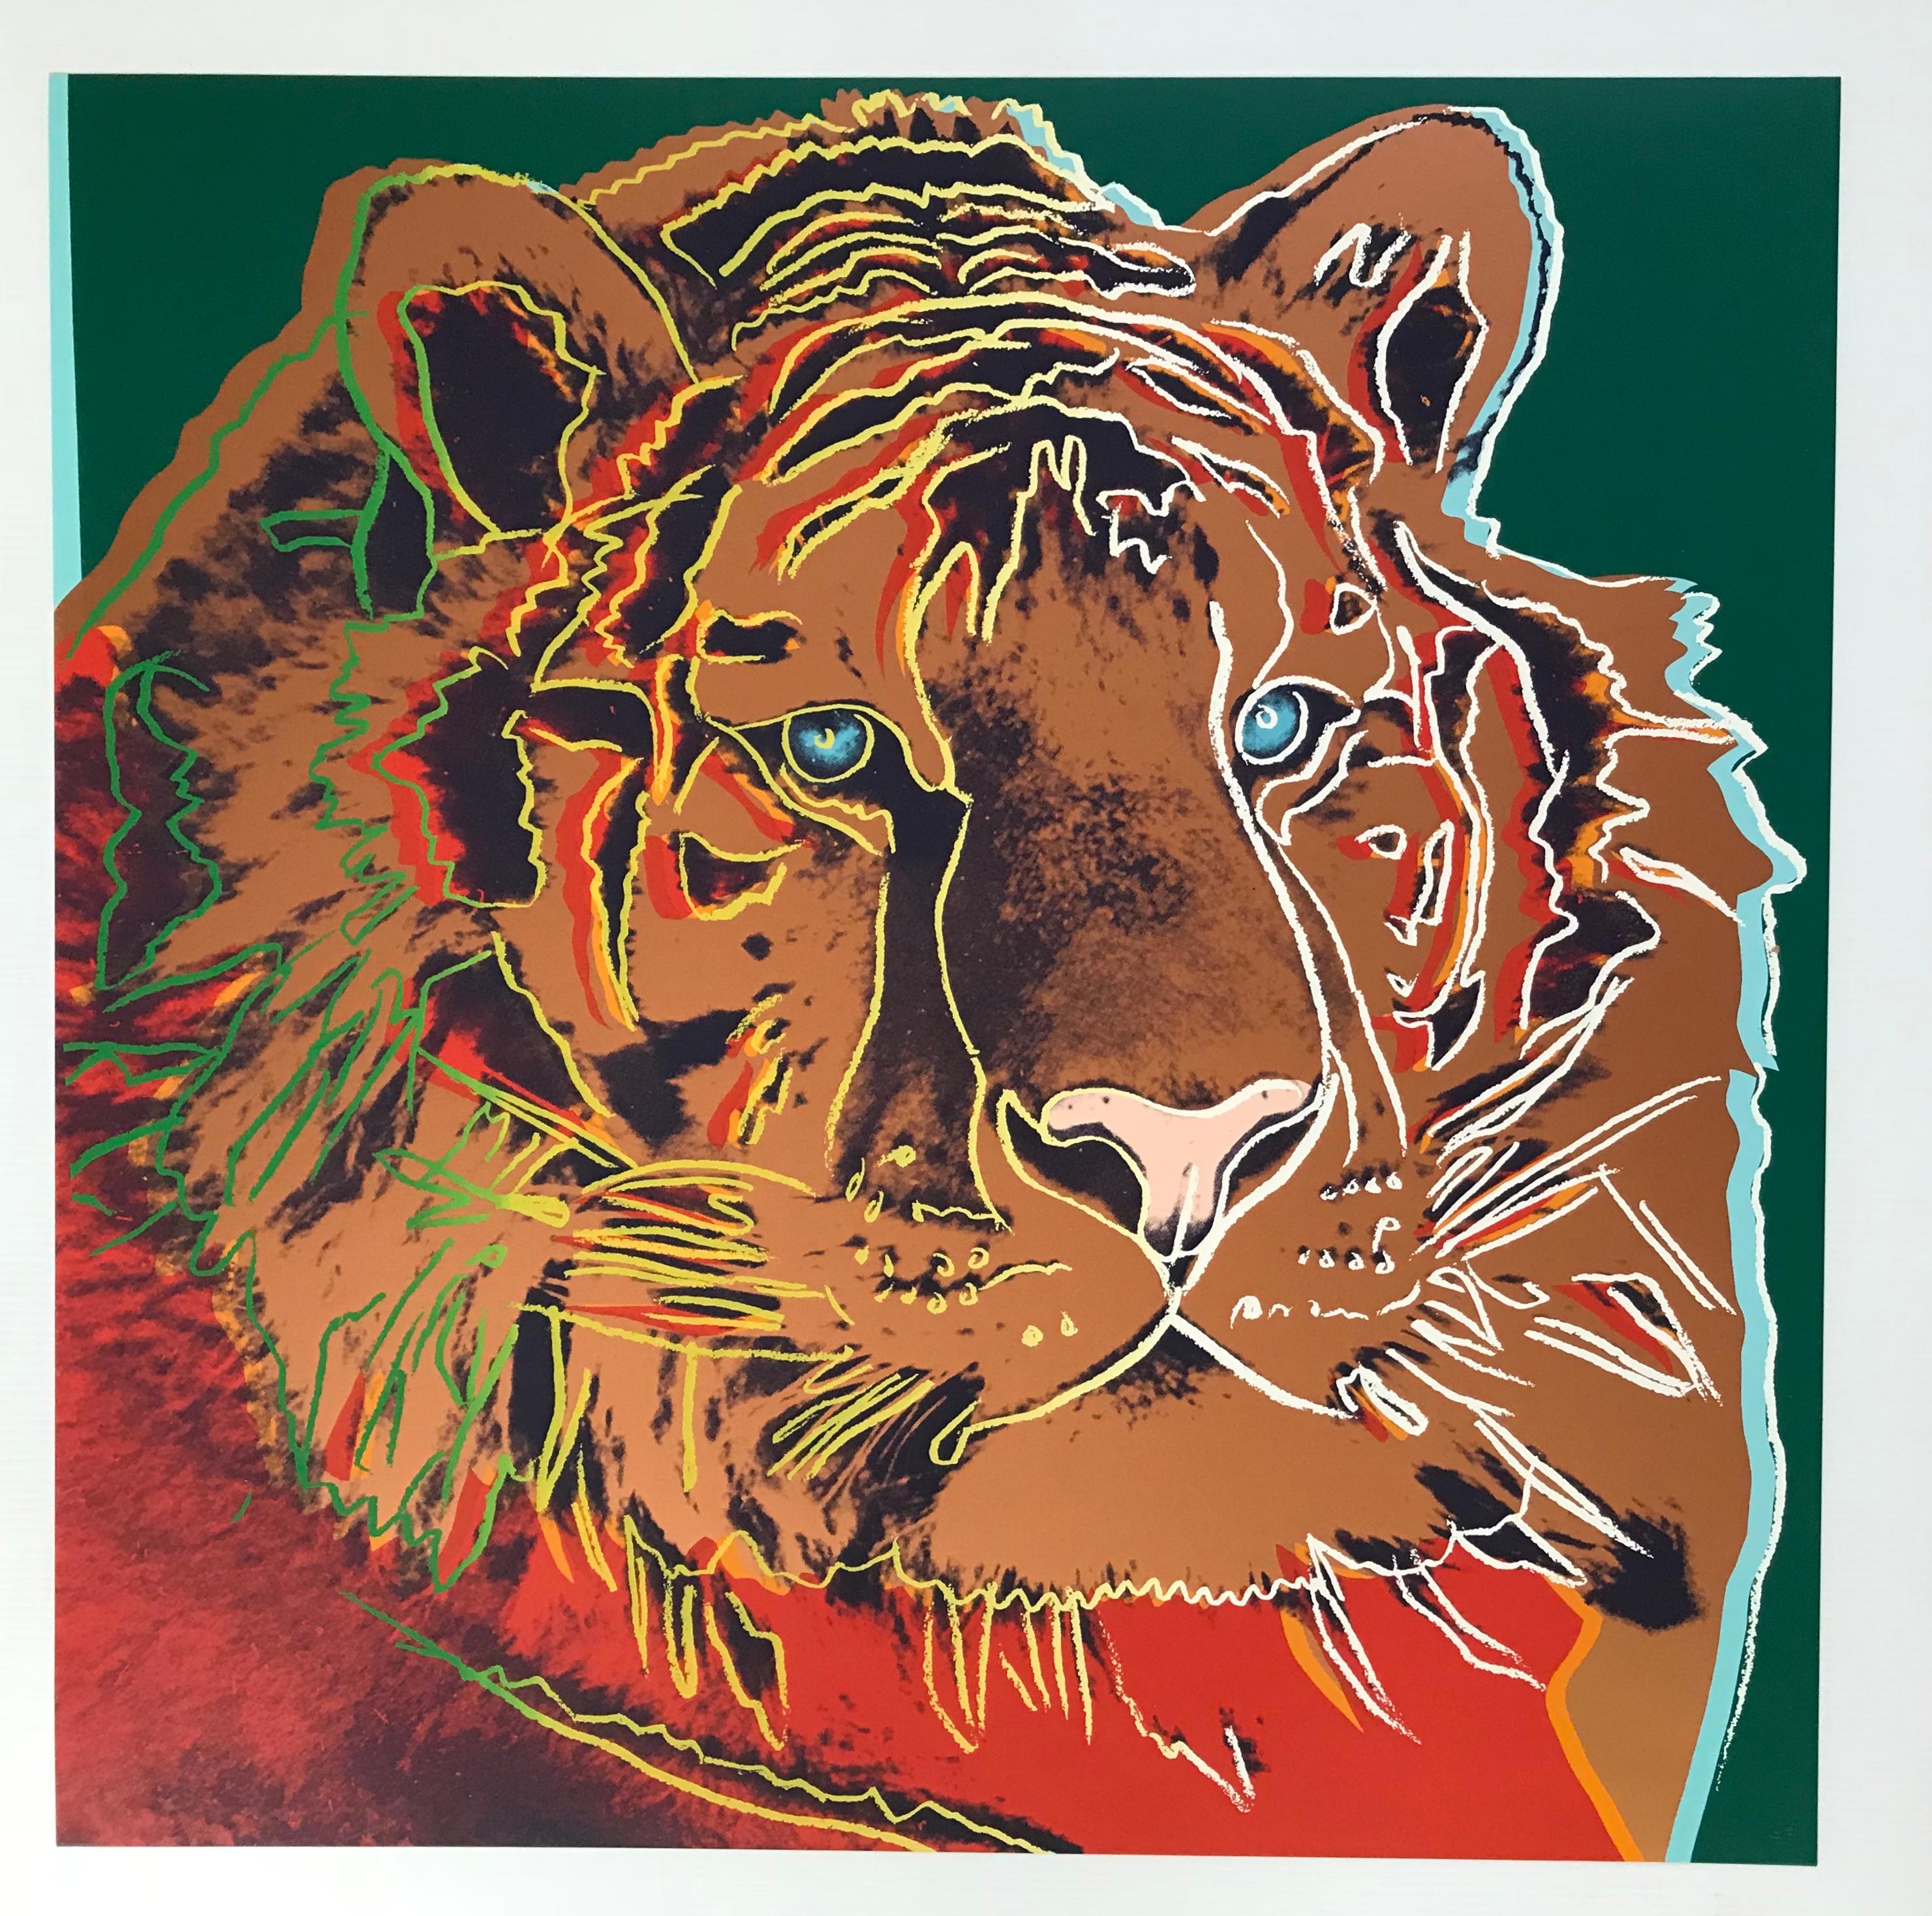 Siberian Tiger from Endangered Species F&S II.297 - Print by Andy Warhol